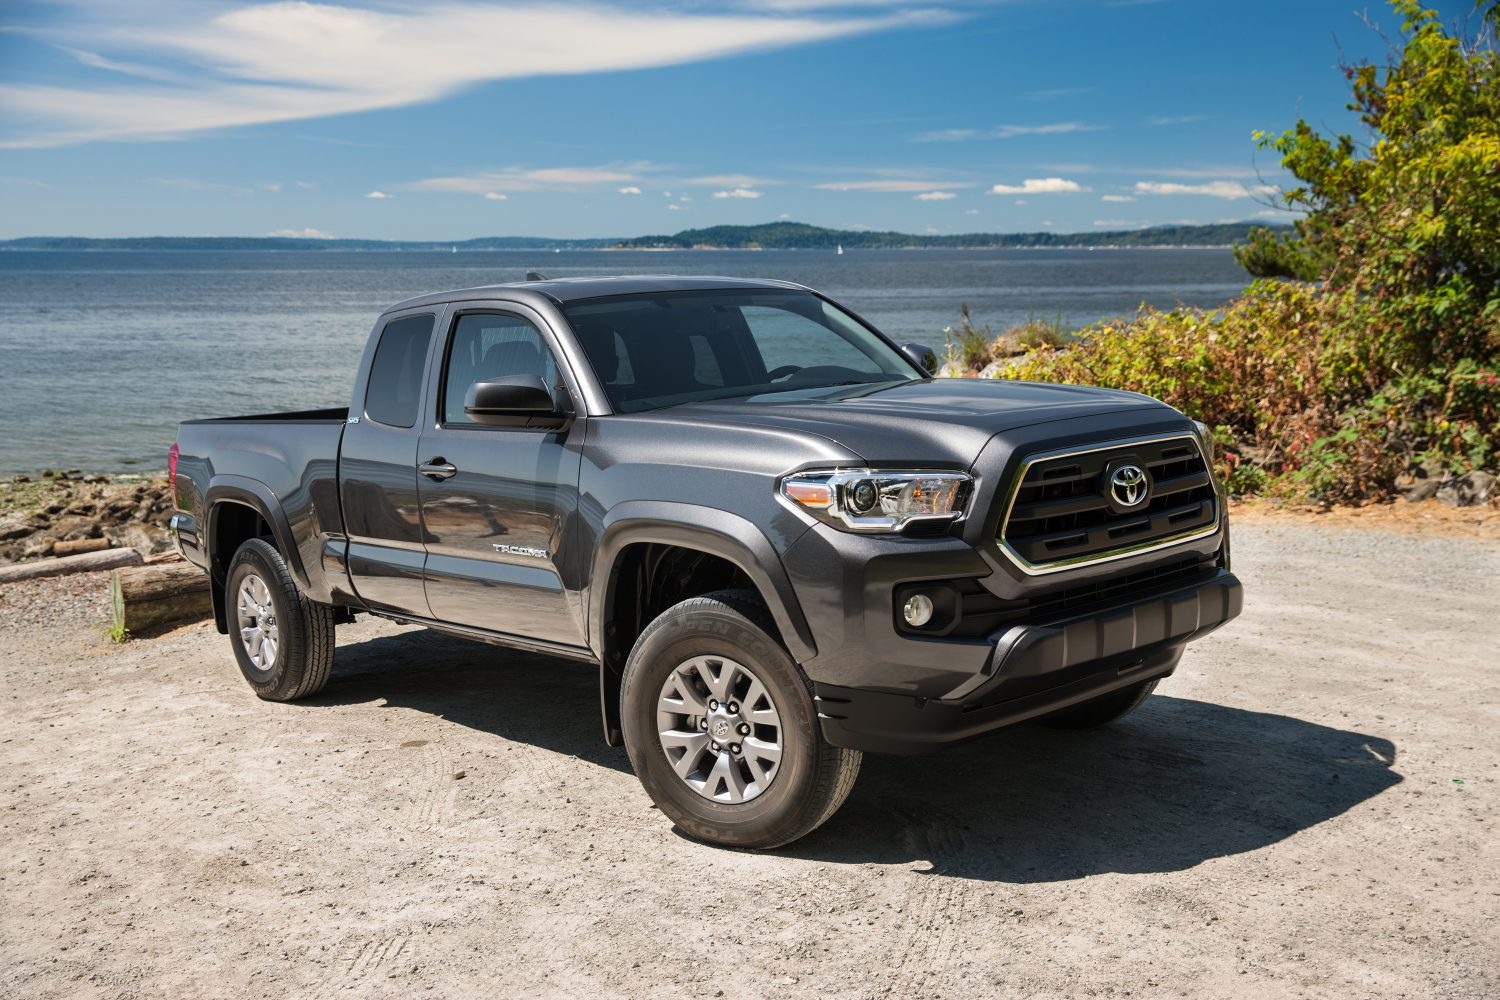 Reliable and popular compact trucks from 2016 like the Toyota Tacoma